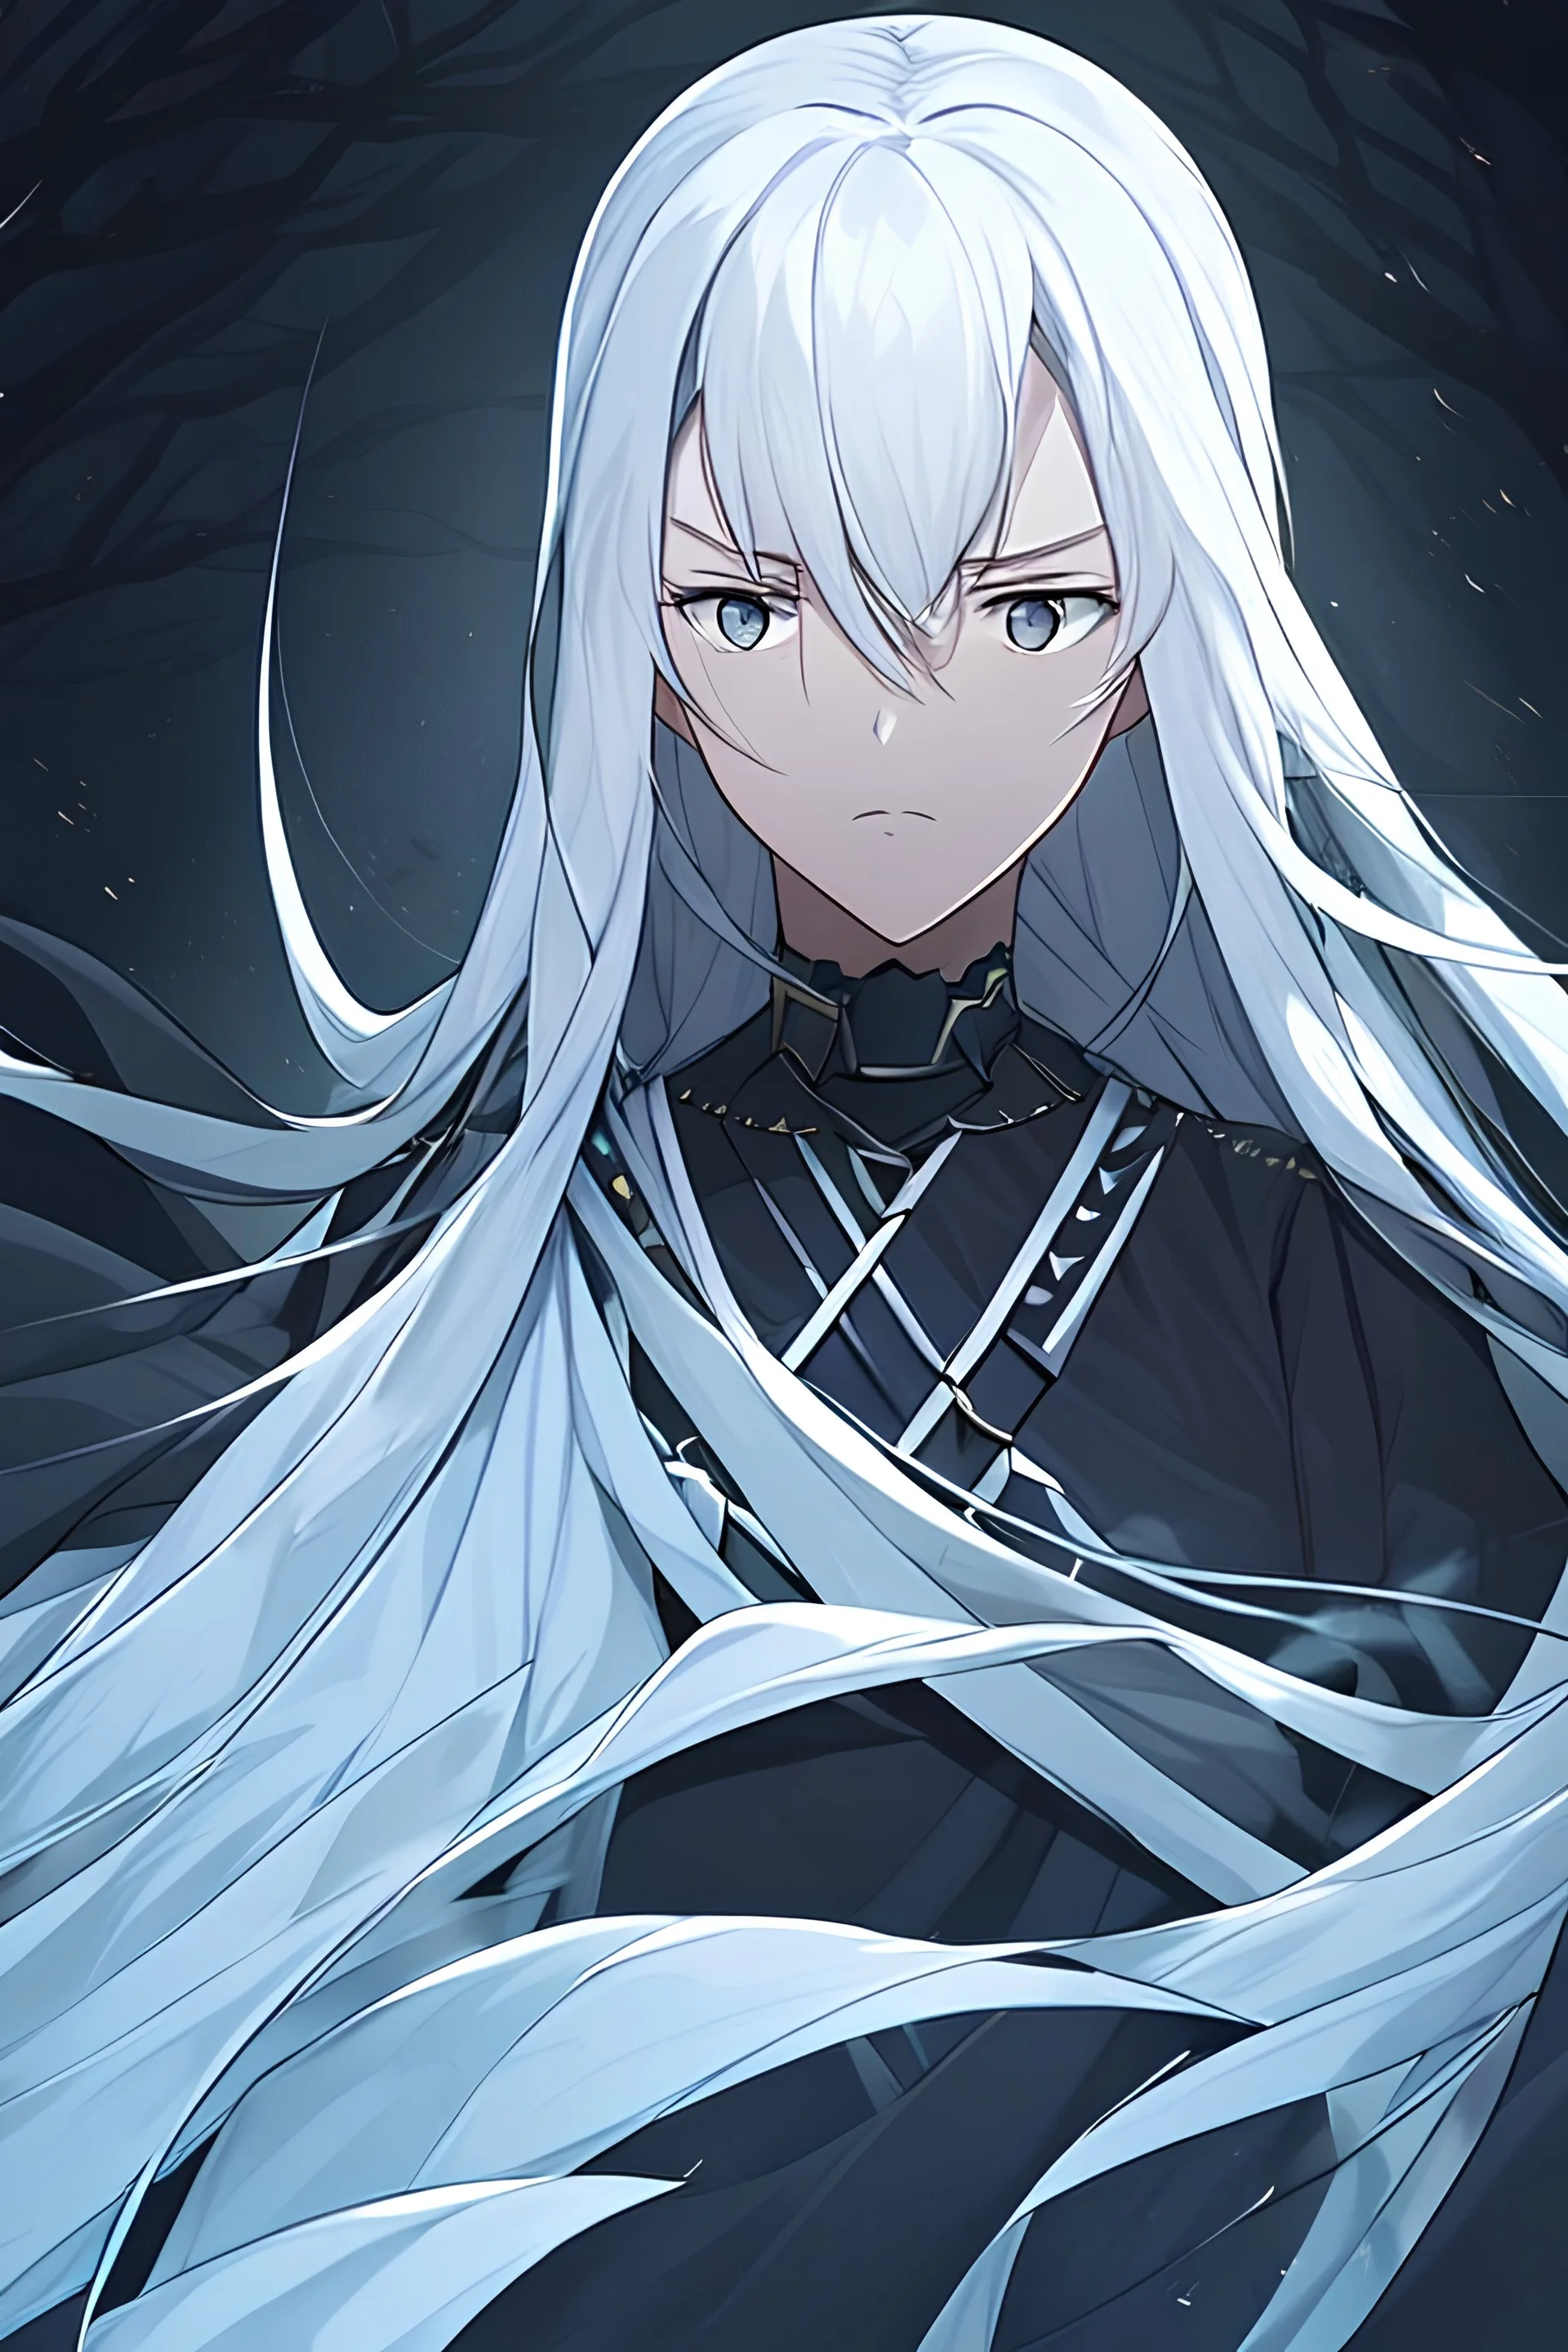 anime girl, princess of fog, in long queen dress, long white hair fluttering in wind, serious face, dark winter forest on the background, portrait, anime, mystery atmosphere